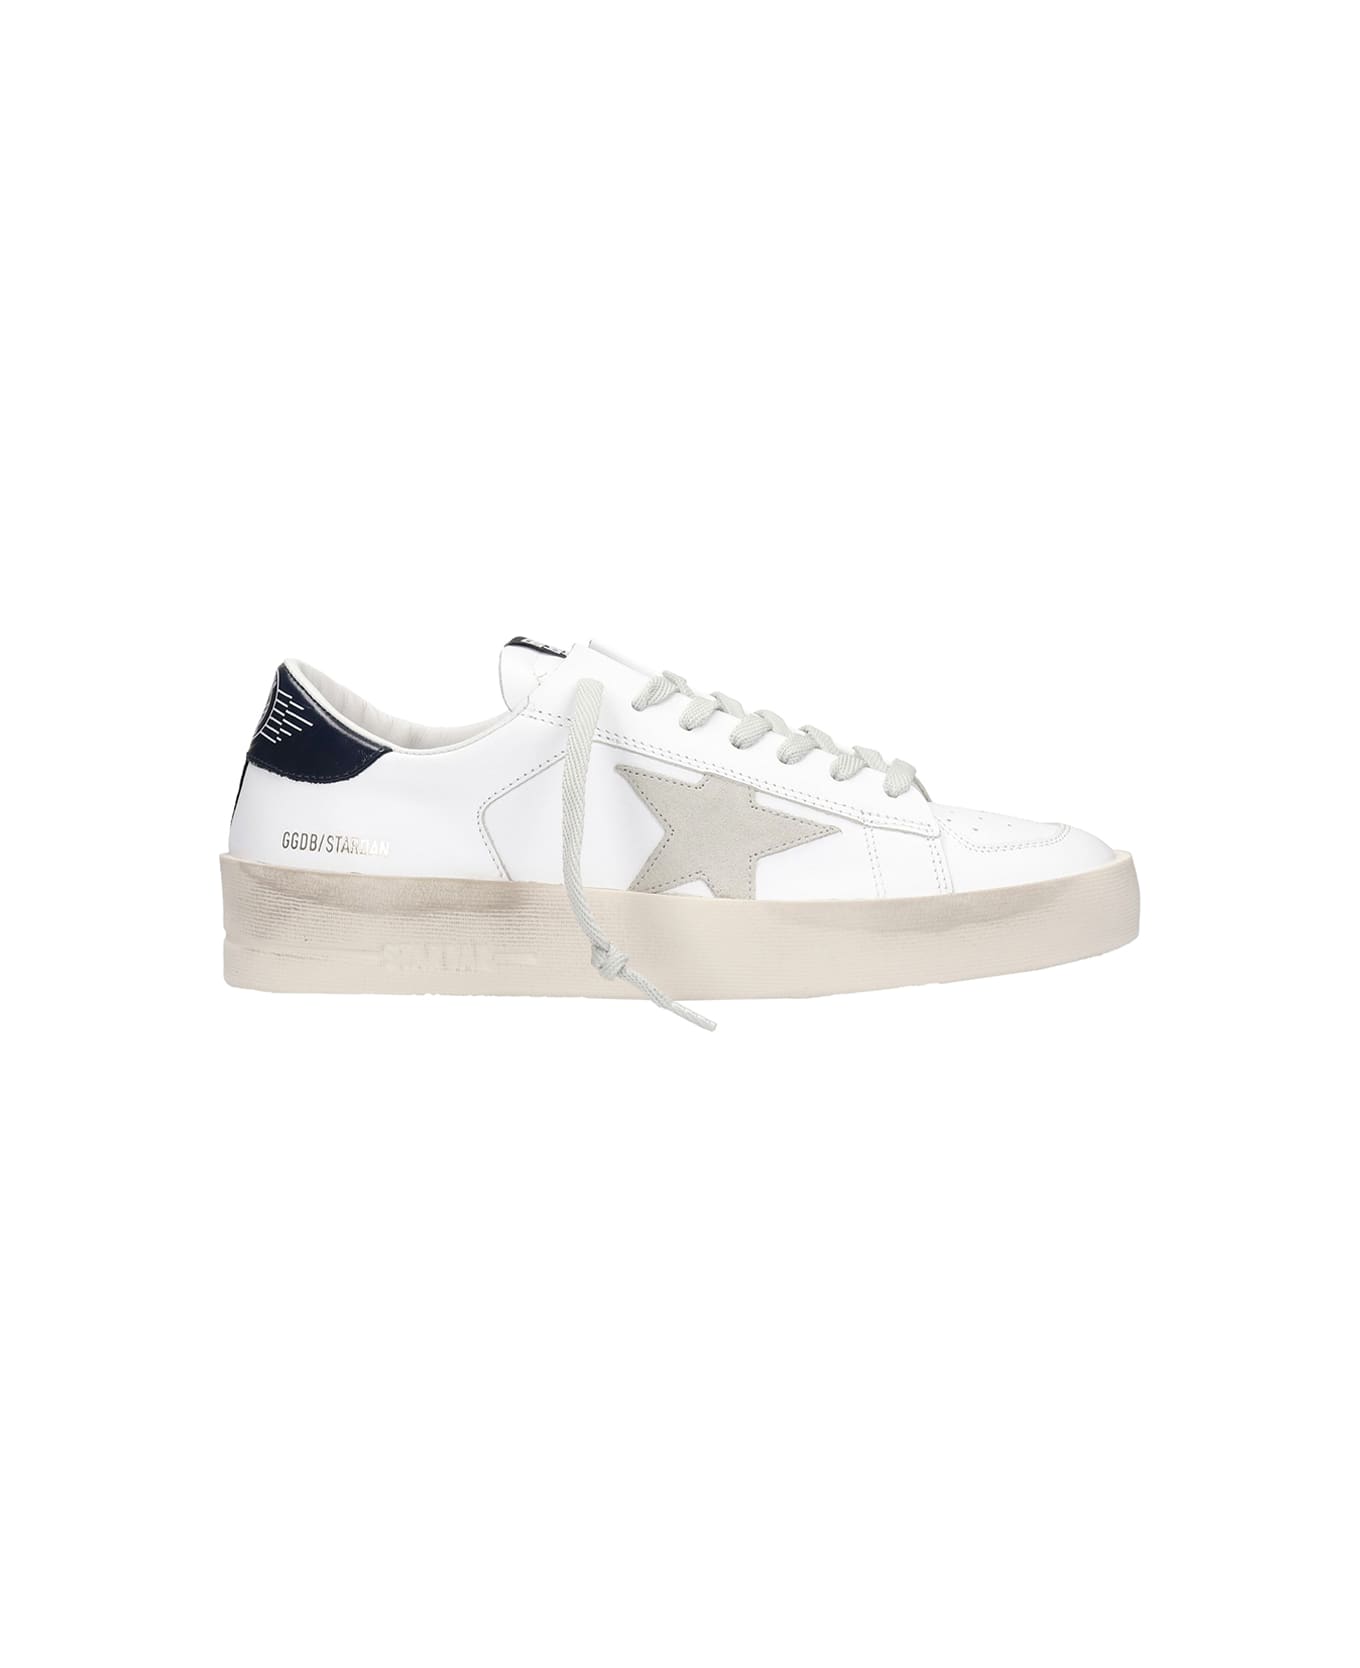 Golden Goose Stardan Leather Upper Suede Star Shiny Leather Heel - White Ice Blue スニーカー